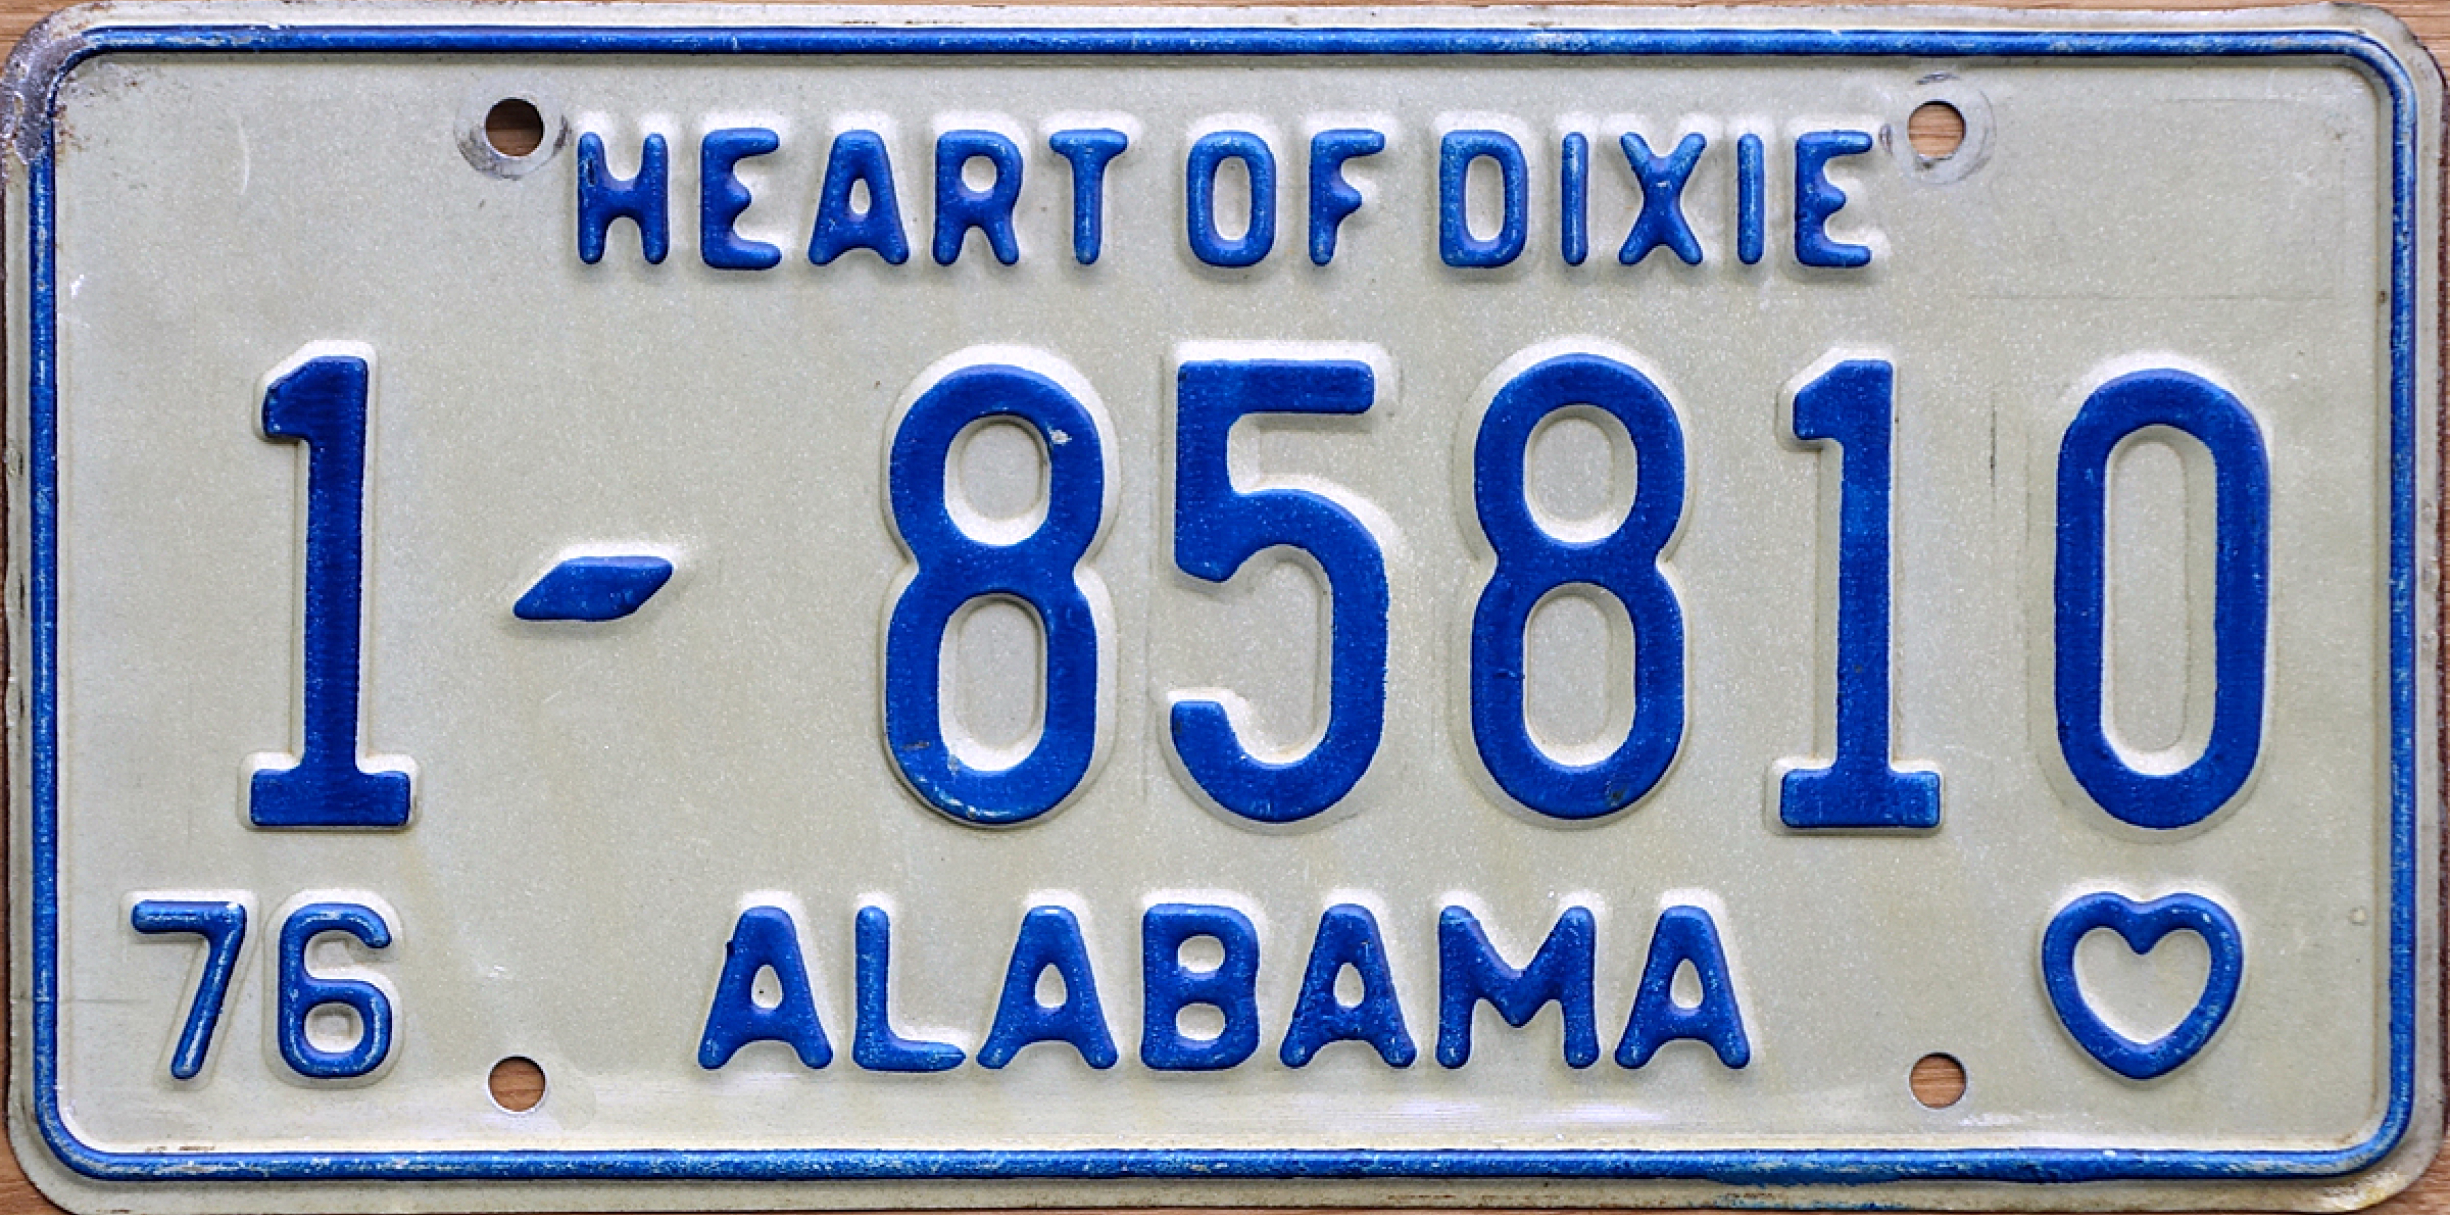 A 1976 Alabama license plate with the number 1-85810